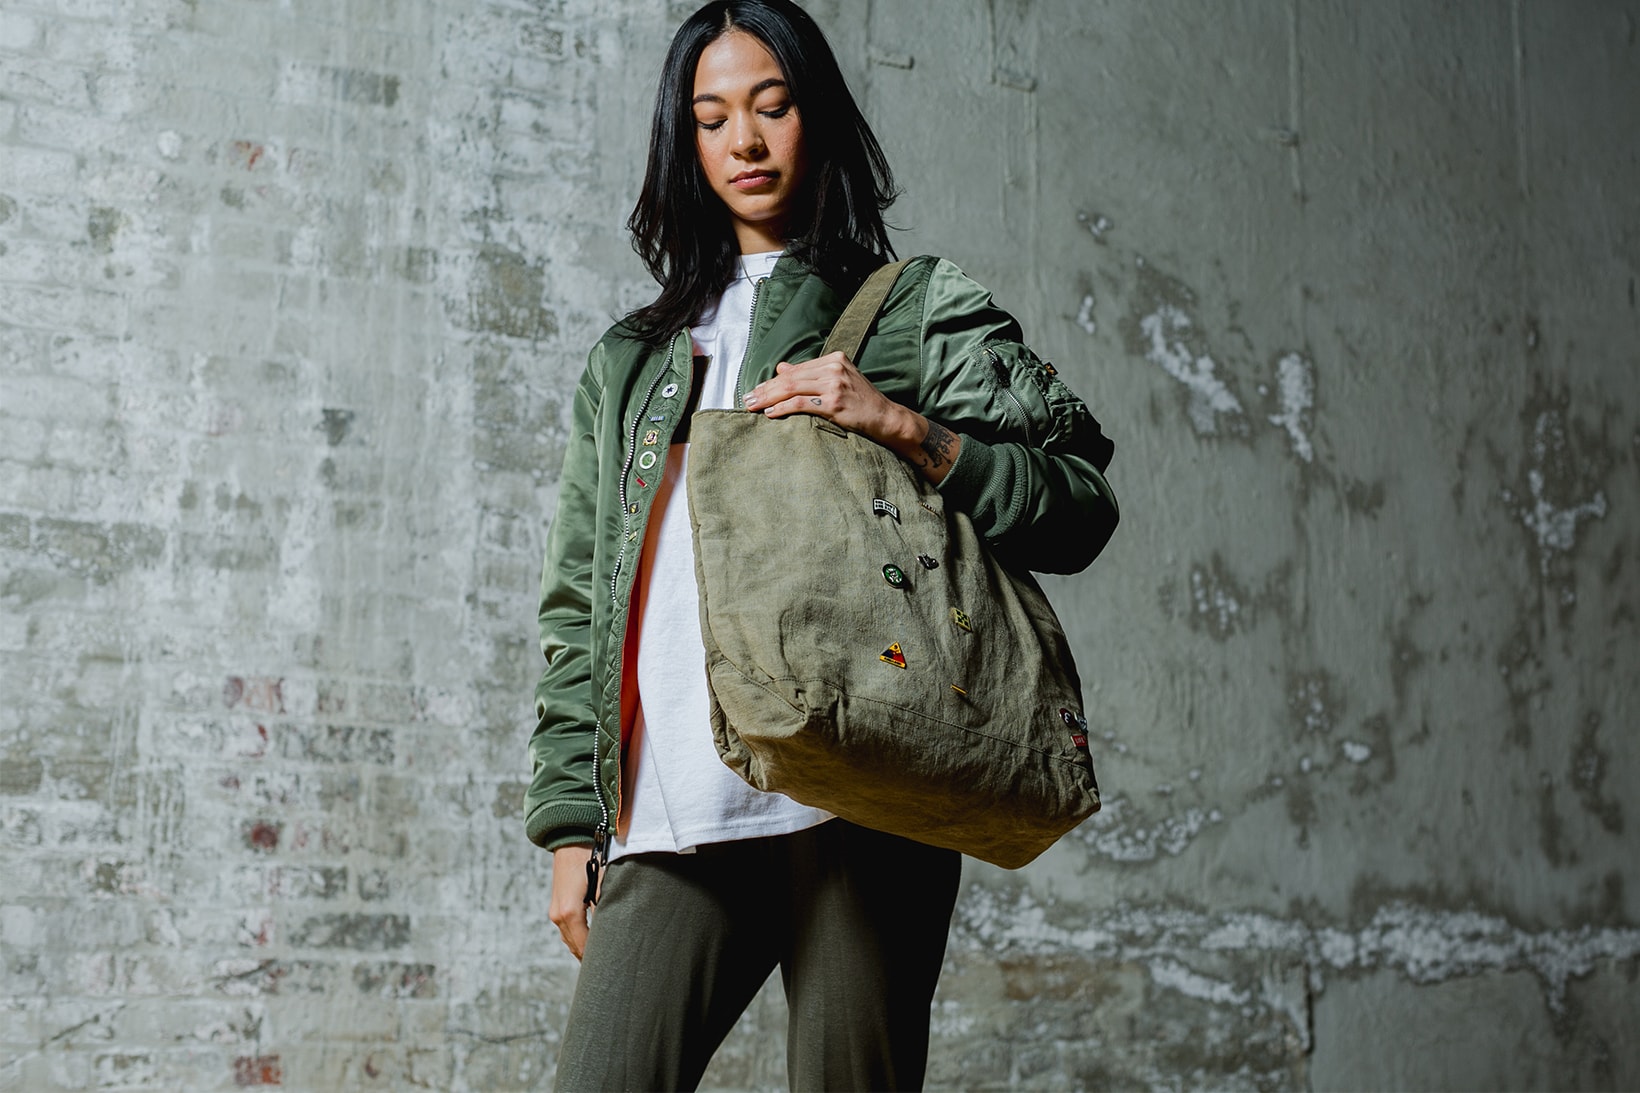 PINTRILL Leisure Life Collaboration Champion Reverse Weave Military Surplus Bags 2017 November 24 Black Friday Release Date Info